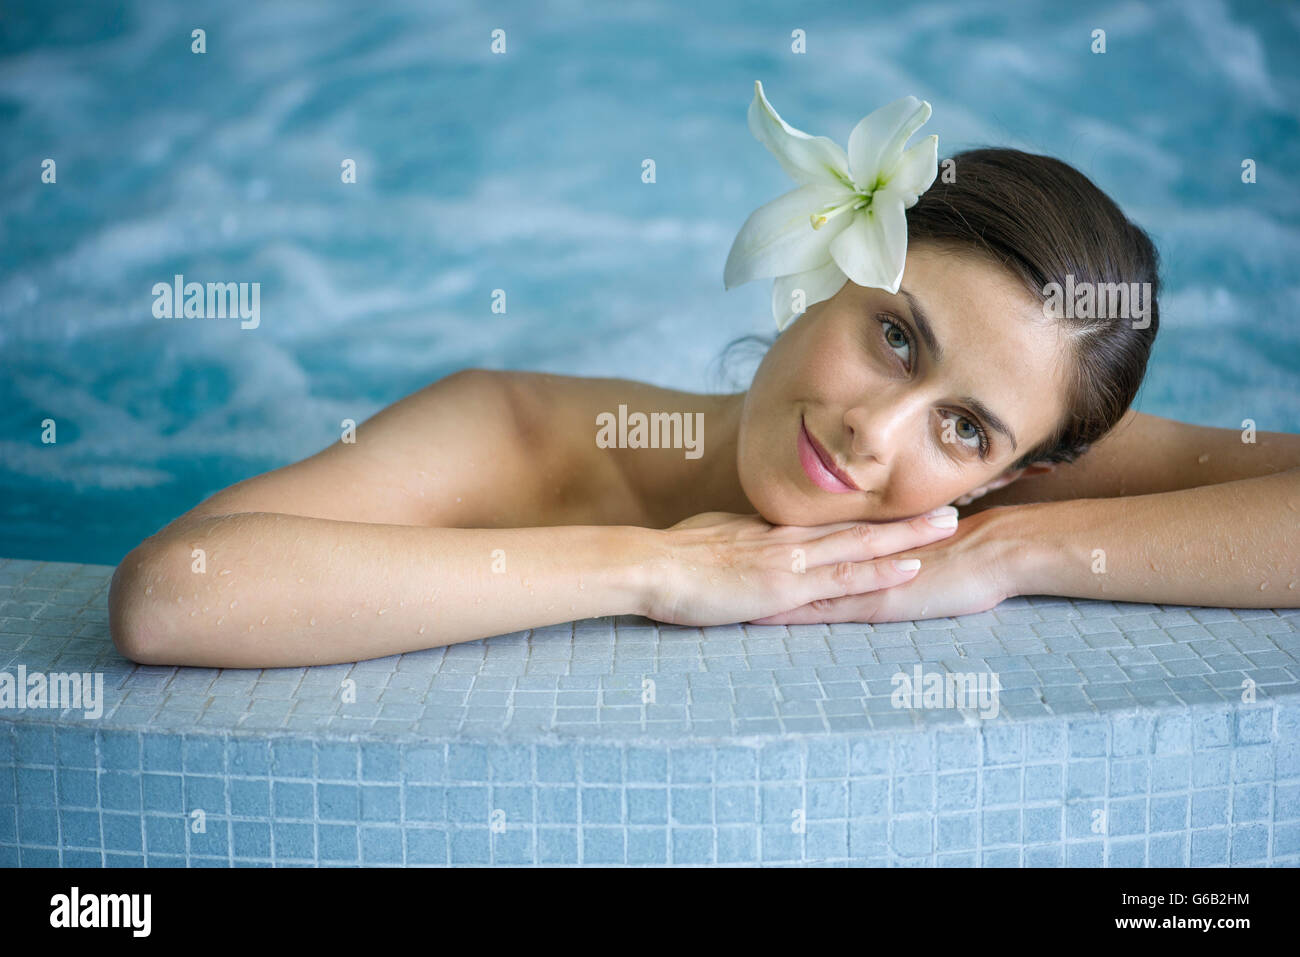 Woman relaxing in jacuzzi Stock Photo